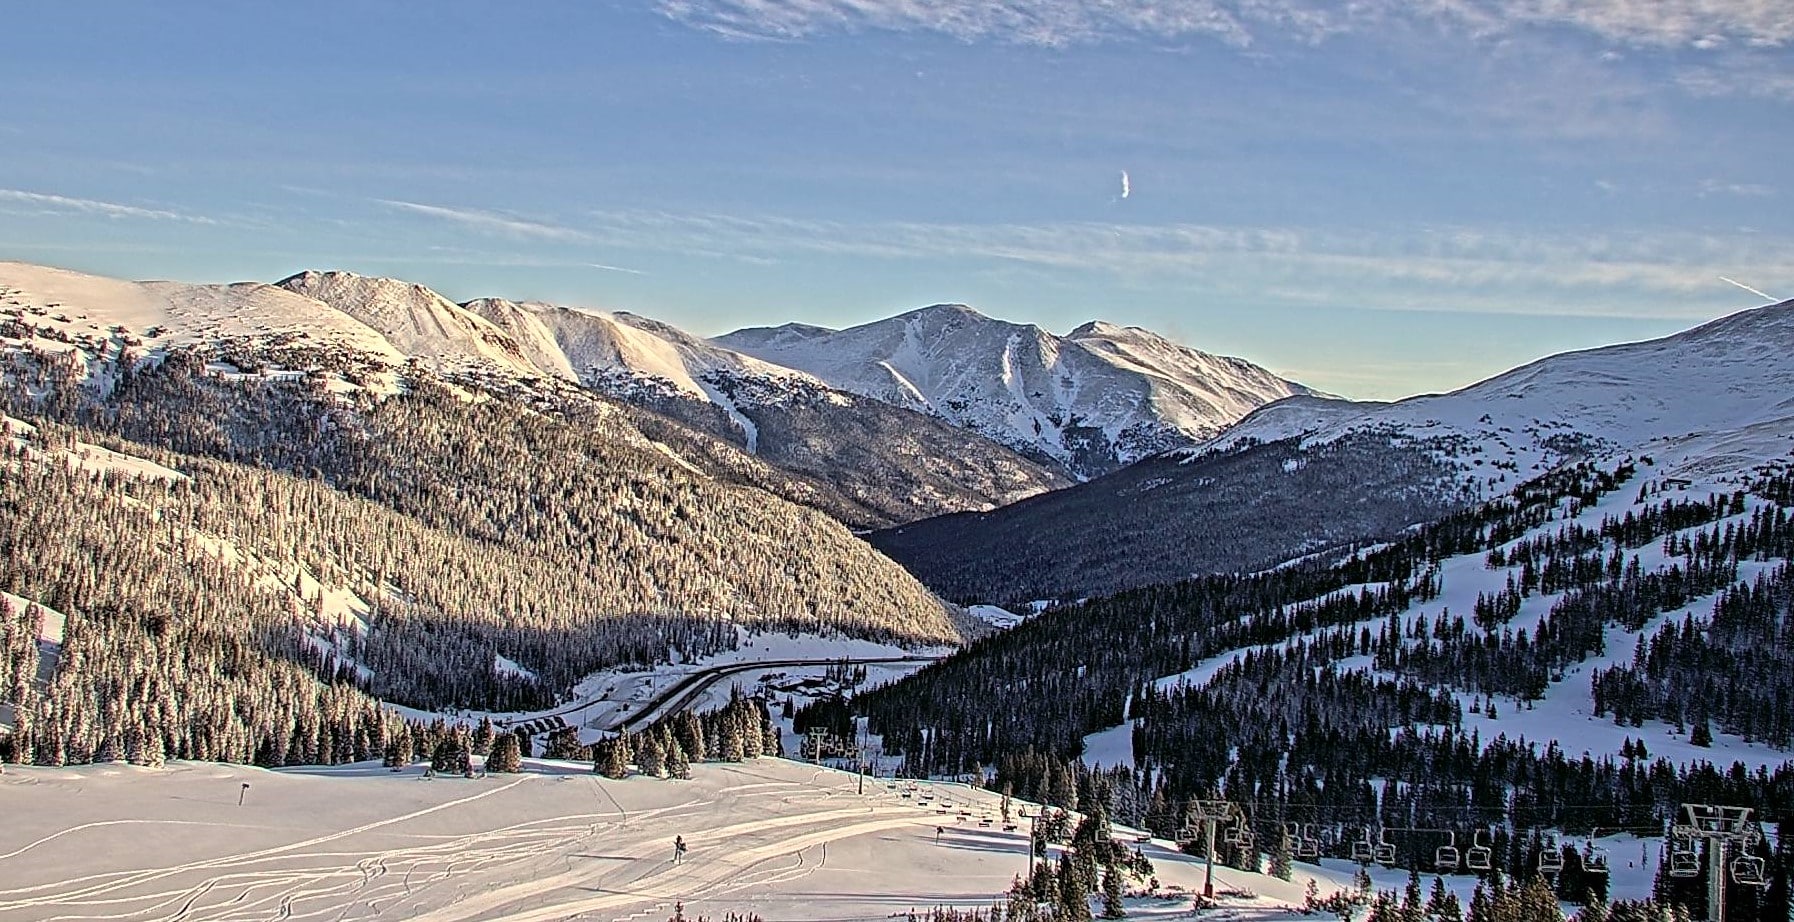 Morning light over the snow-covered mountains at Loveland Ski Area